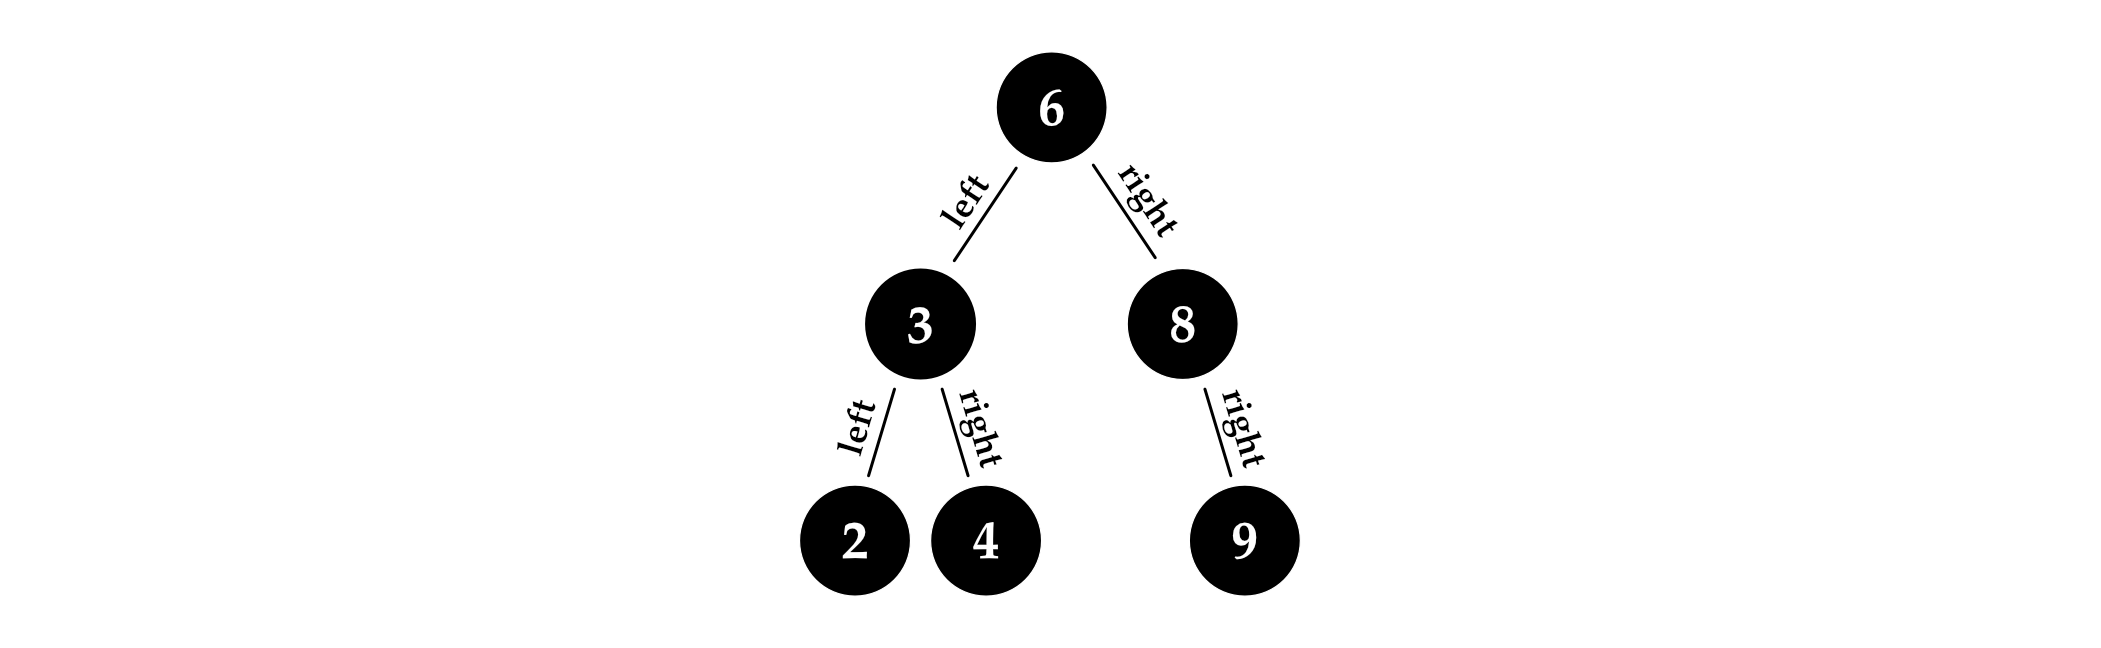 Figure 4.1: A binary search tree. Node 6 is the root node and nodes 6, 3, and 8 are internal nodes, while nodes 2, 4, and 9 are leaves.